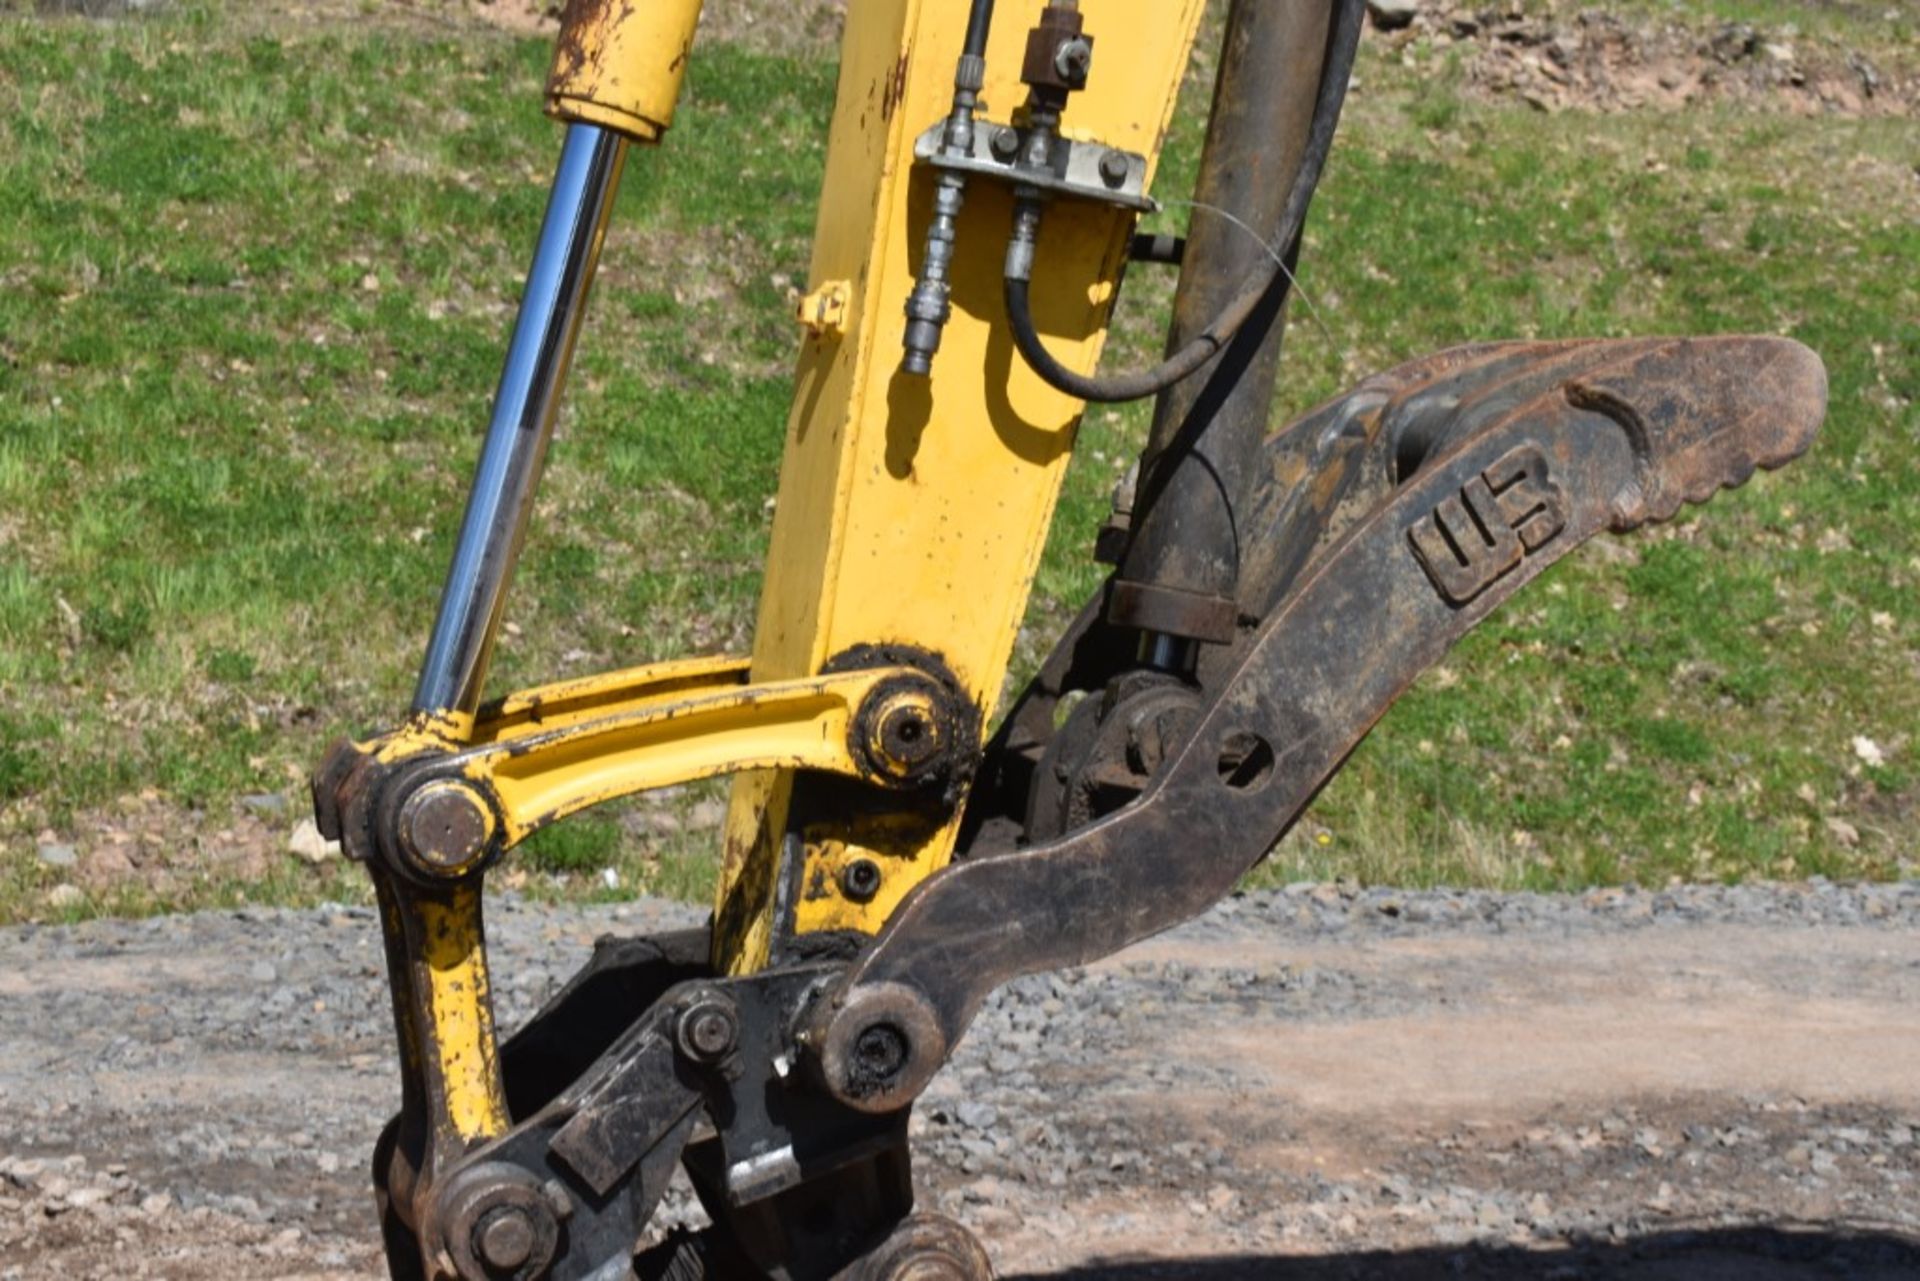 Komatsu PC88MR-8 Excavator 8704 Hours, Runs and Operates, WB 24" Bucket, Quick Coupler, Auxiliary - Image 3 of 49